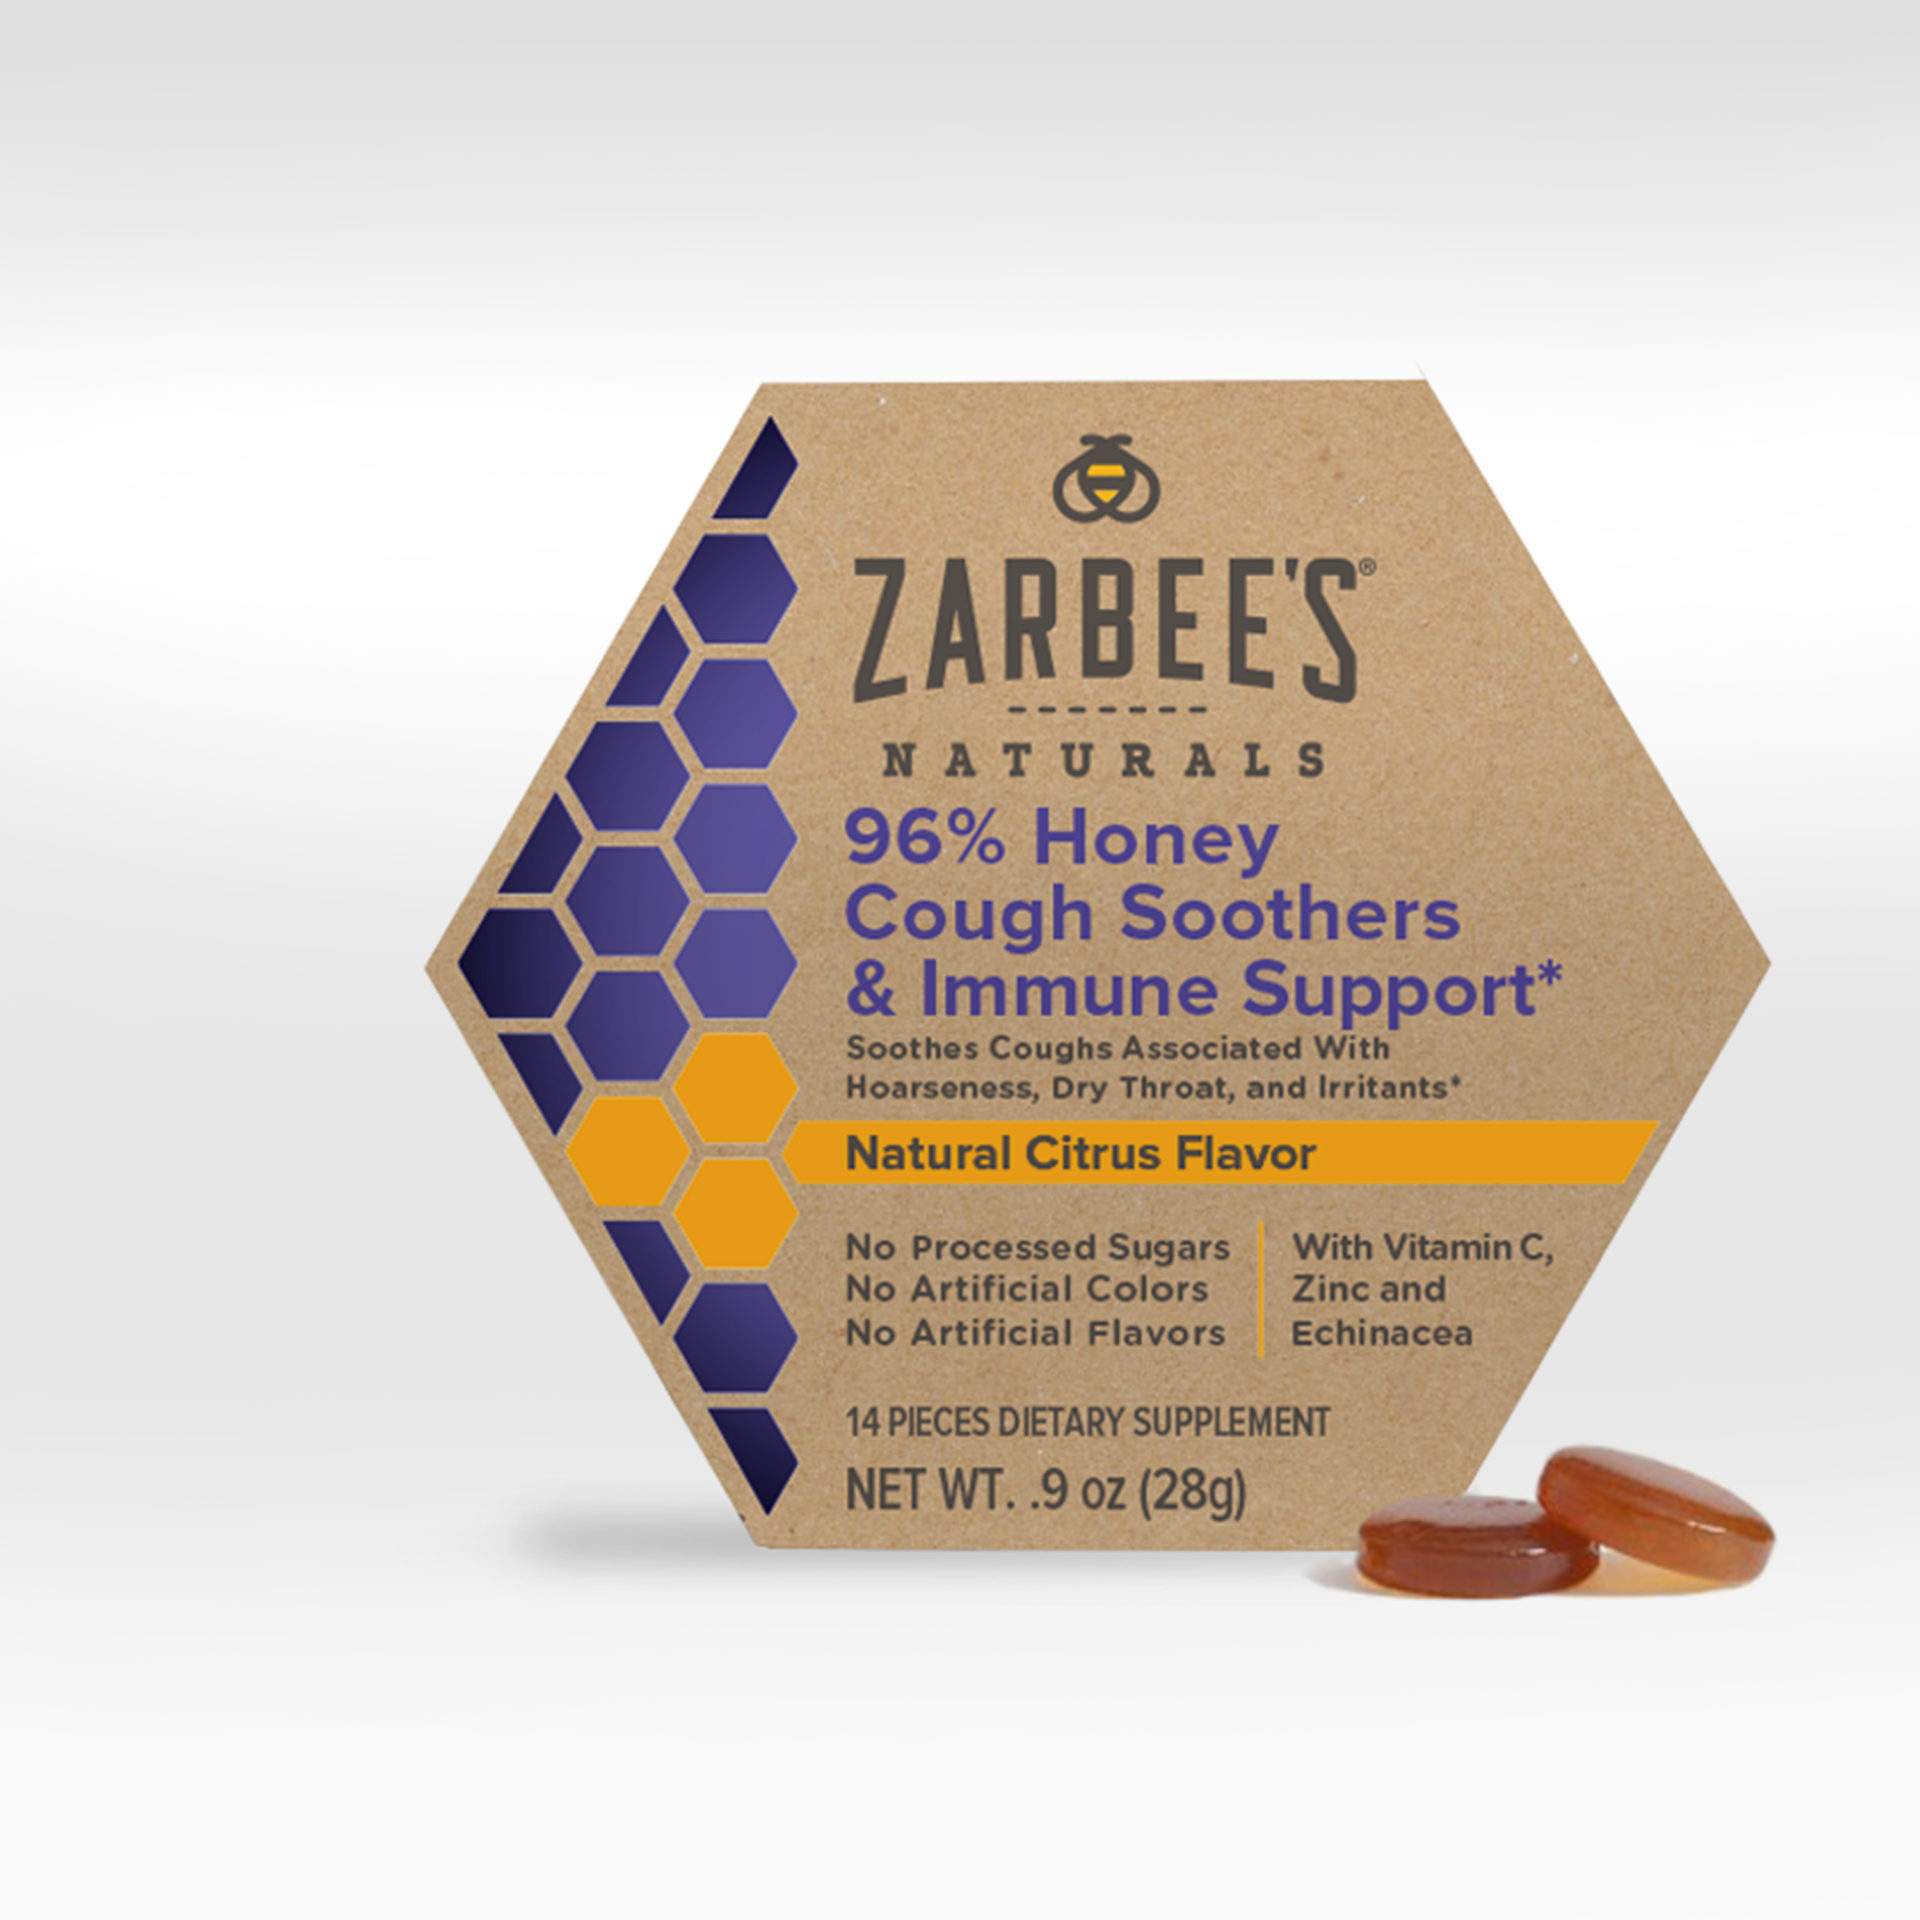 You are currently viewing How Motiv Helped Zarbee’s Disrupt the Cough Drop Category Through Package Design